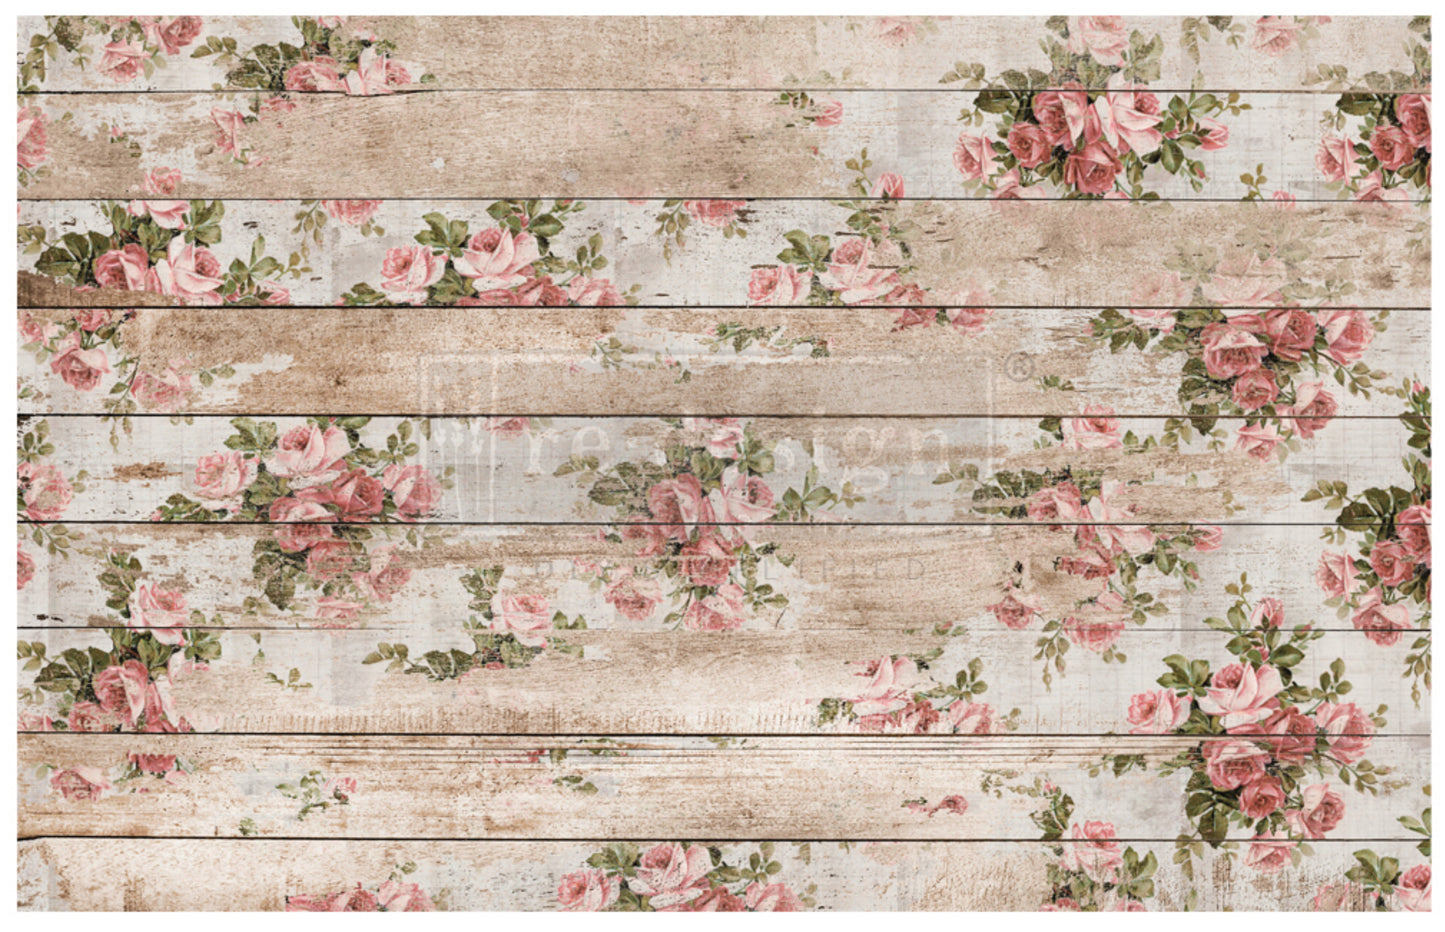 REDESIGN DECOUPAGE DECOR TISSUE PAPER – SHABBY FLORAL – 2 SHEETS (19″ X 30″)